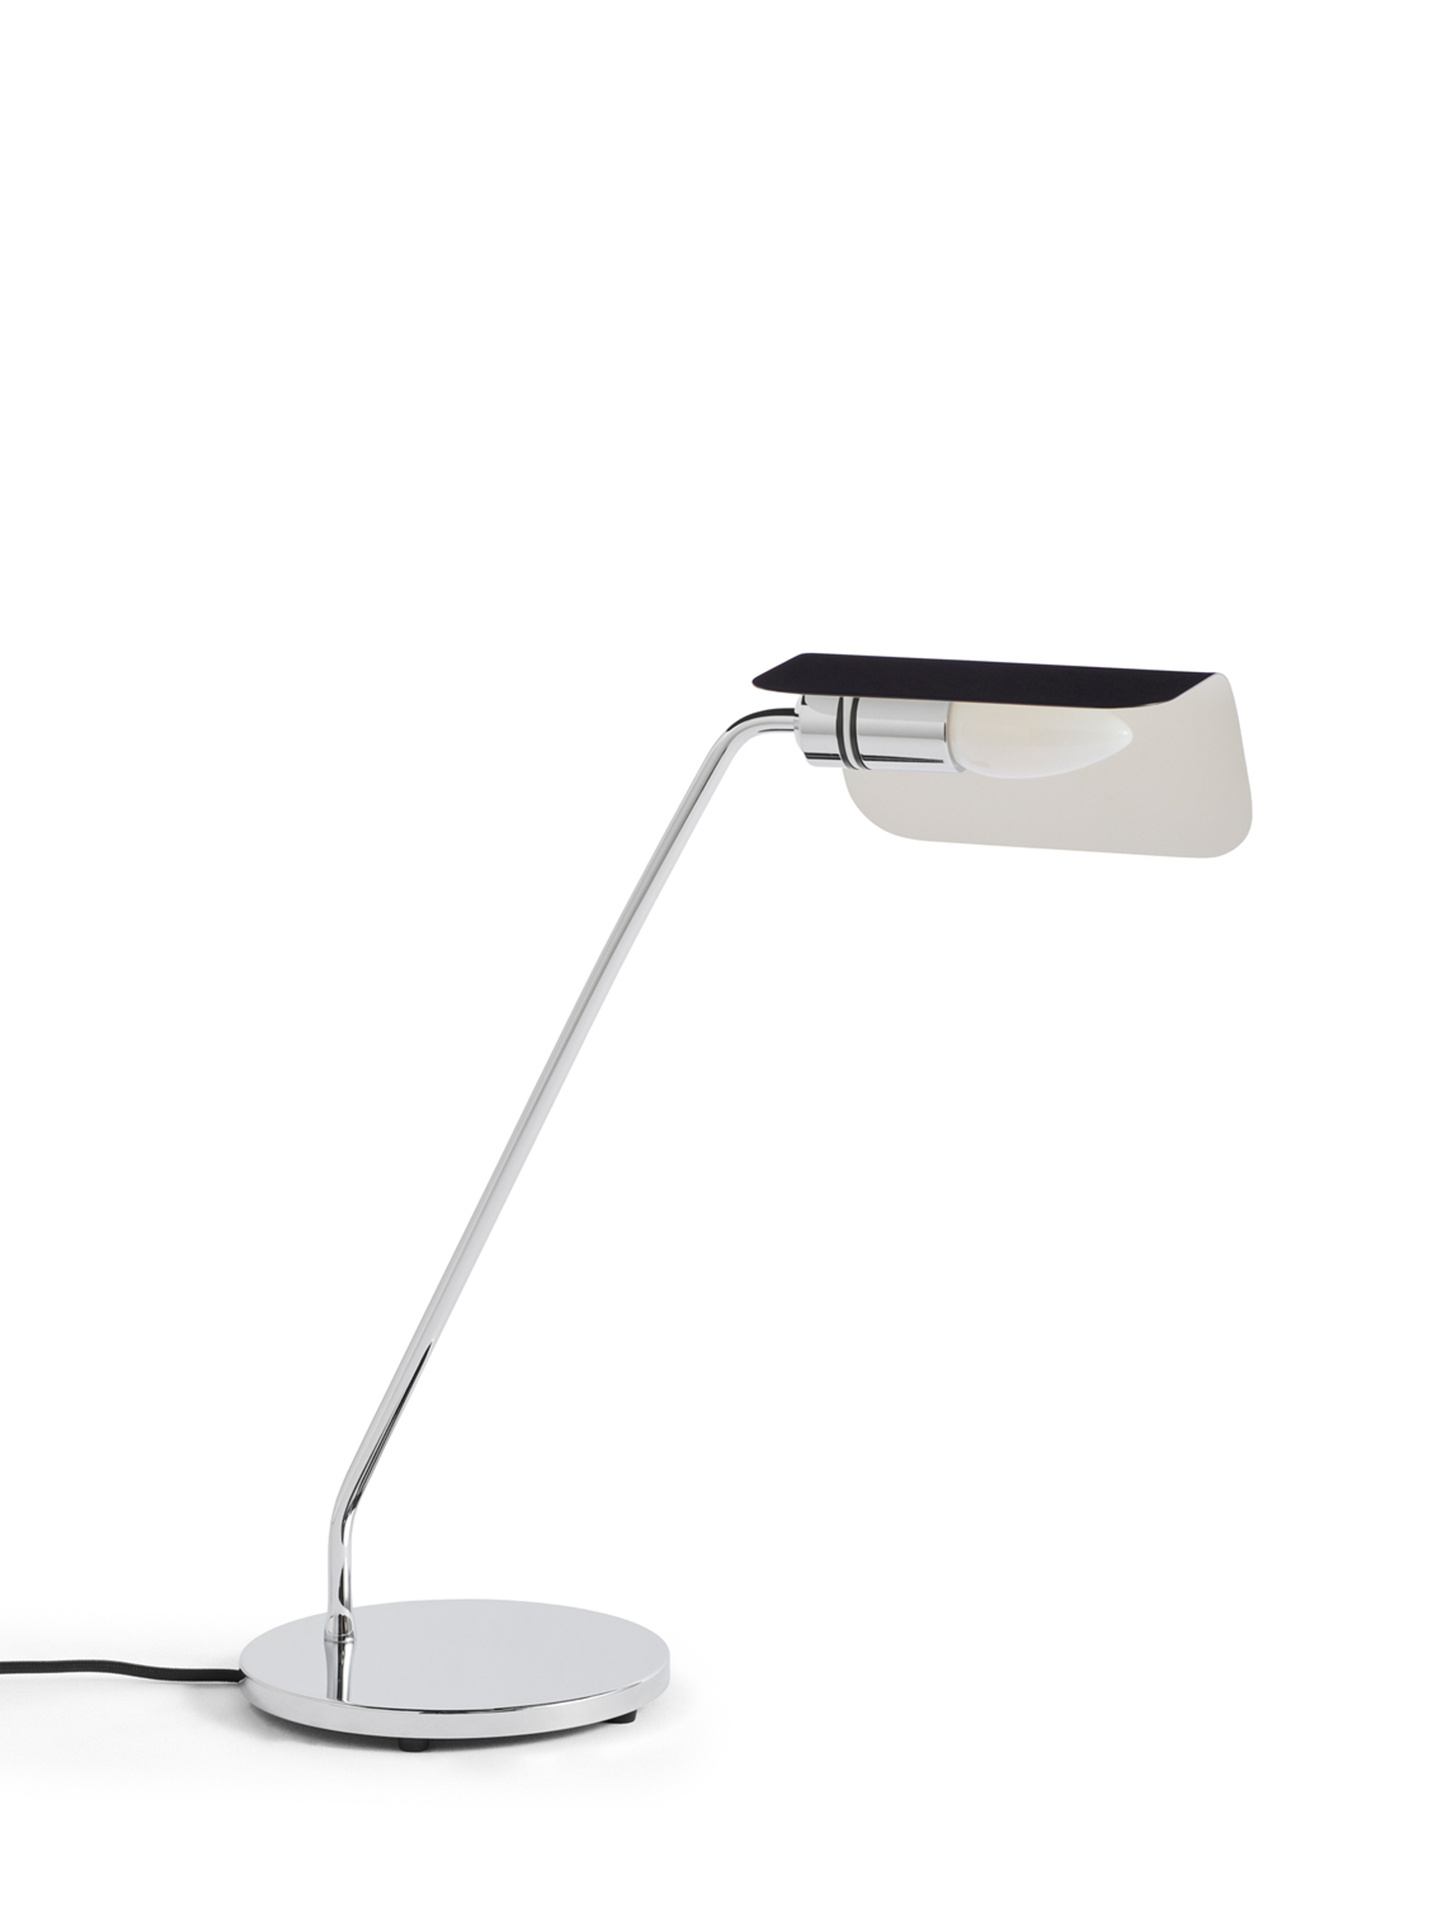 Apex table lamp by John Tree for Hay